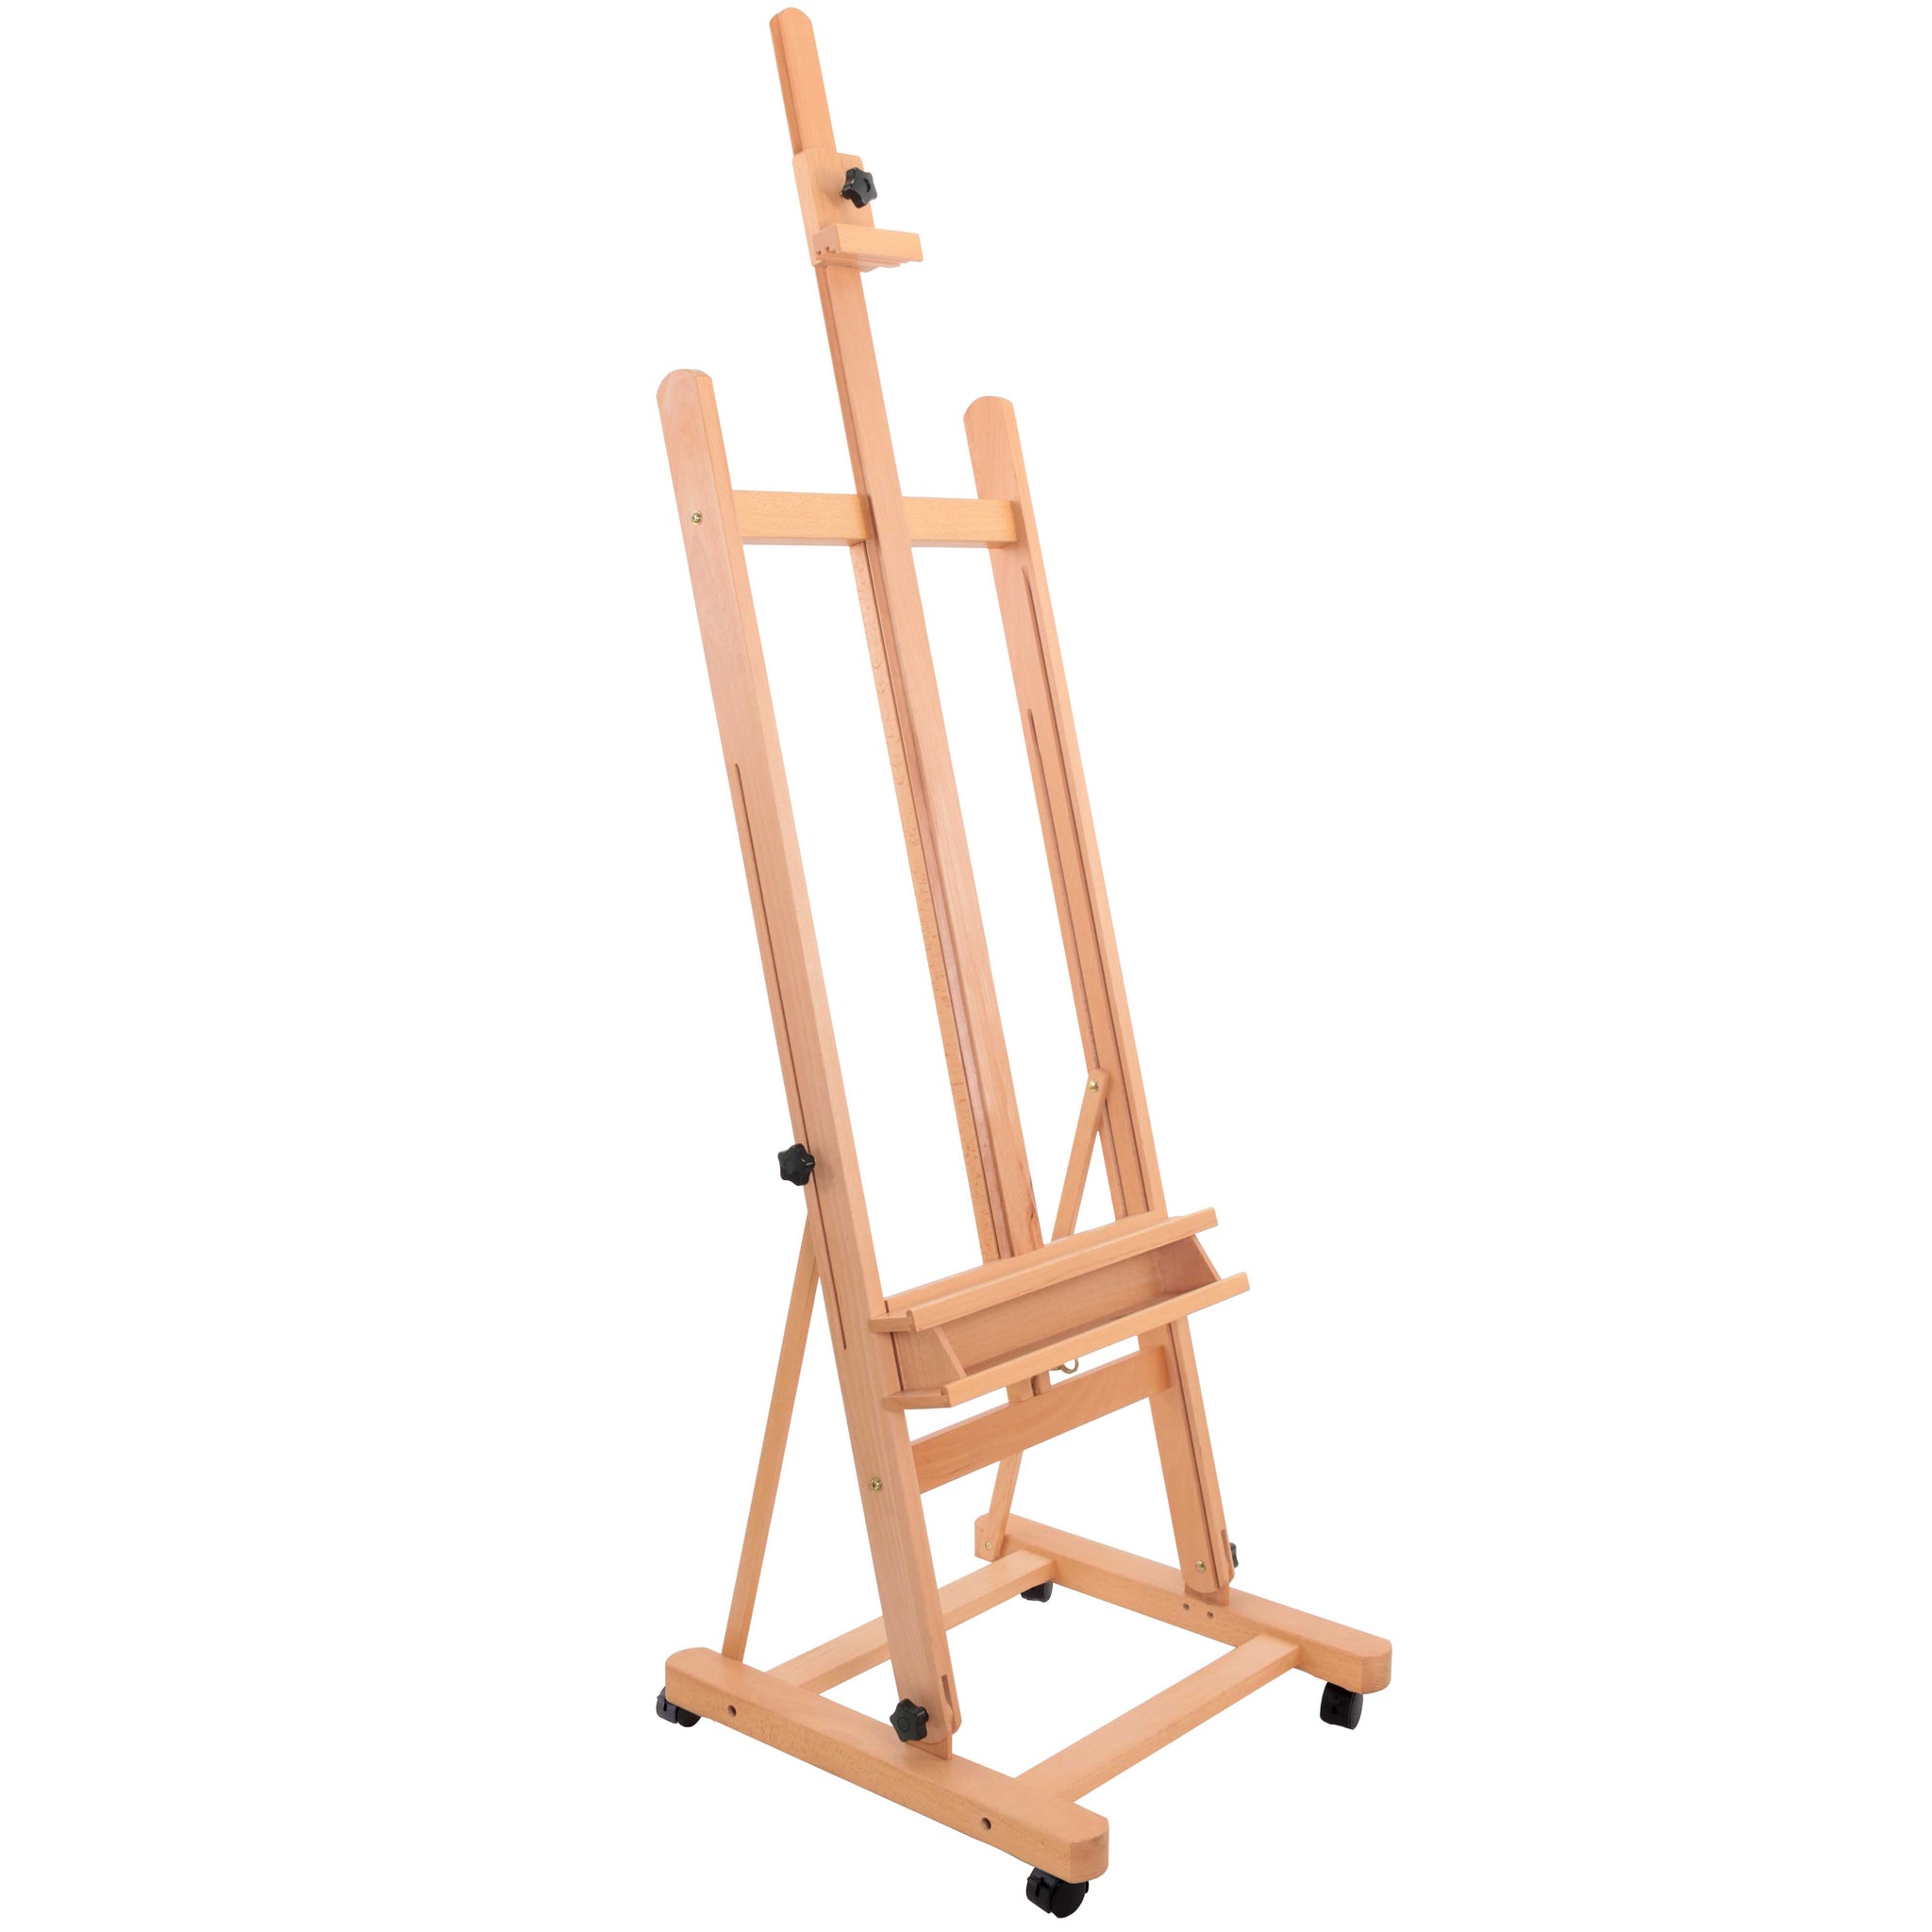 Medium Wooden H-Frame Studio Easel with Artist Storage Tray and Wheels - Mast Adjustable to 96